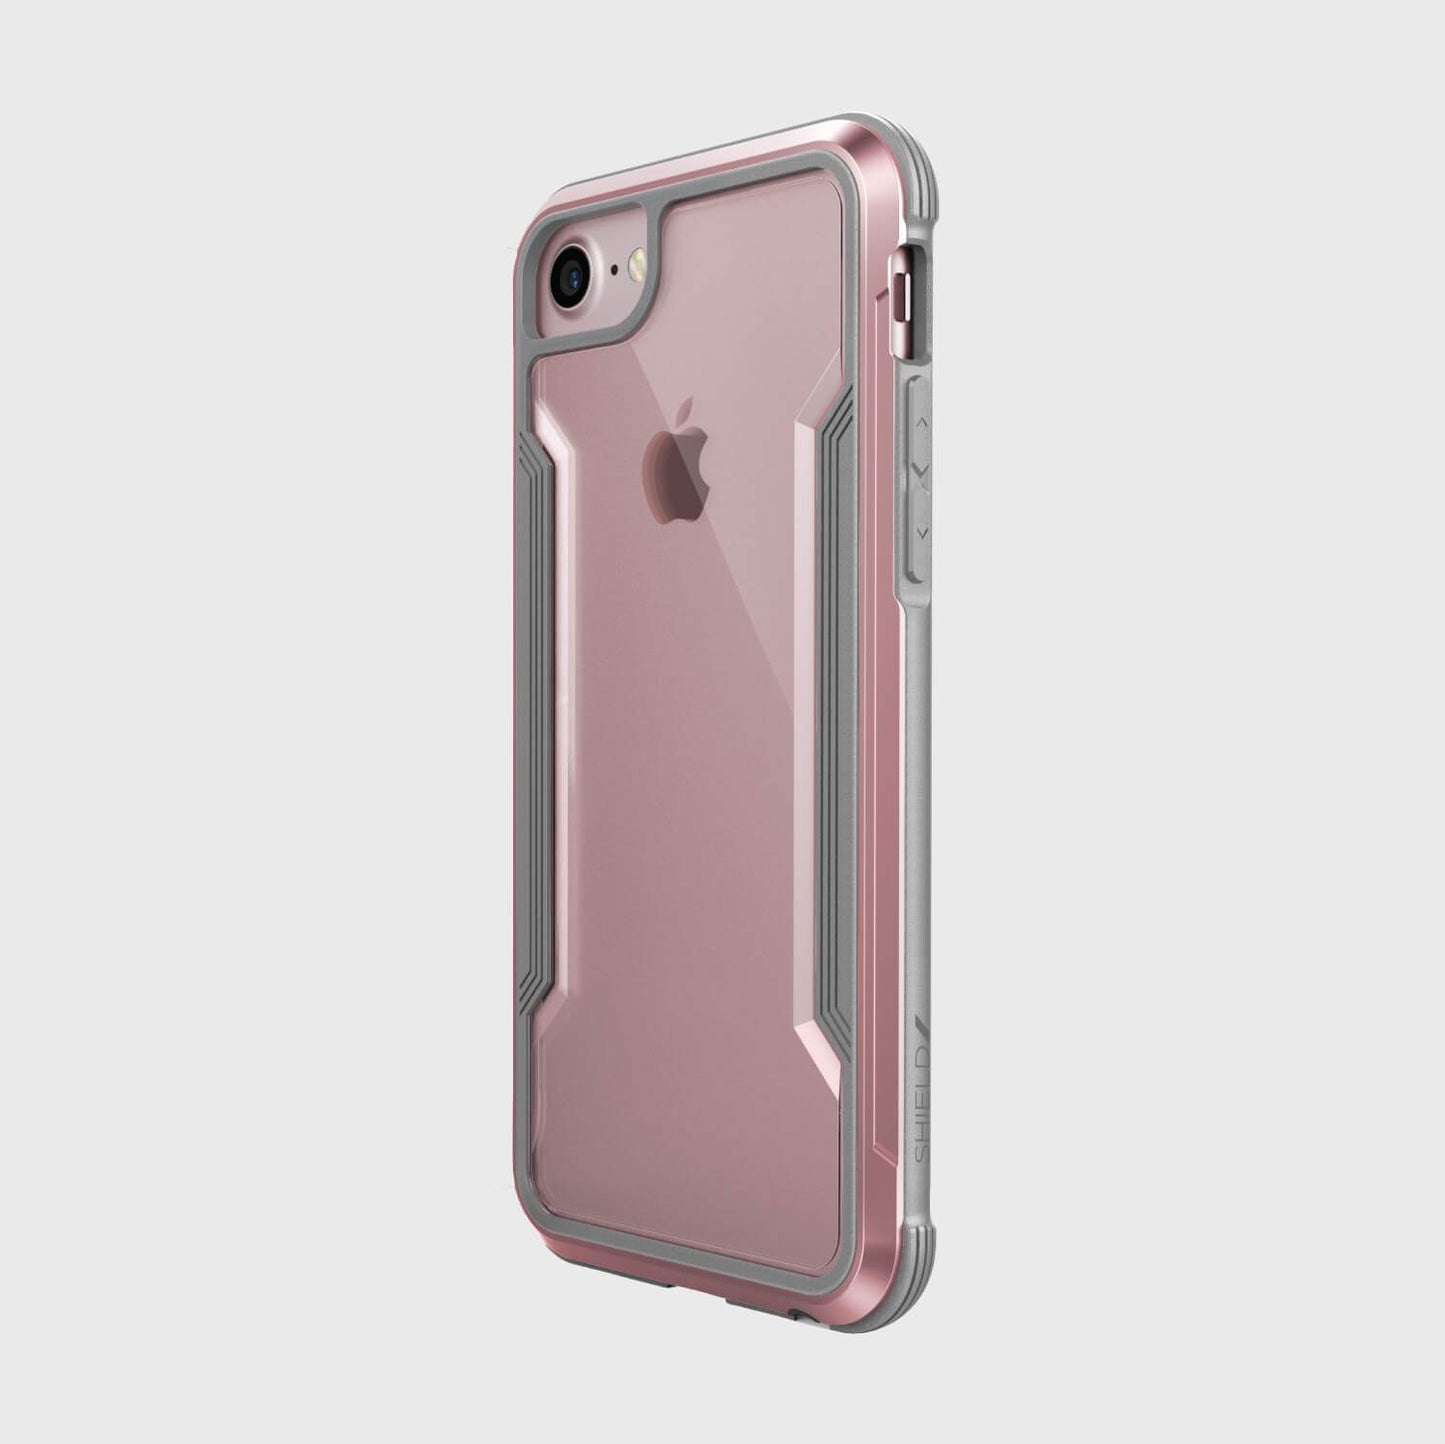 The back of an iPhone SE/8/7 Case - SHIELD in pink and silver by Raptic.